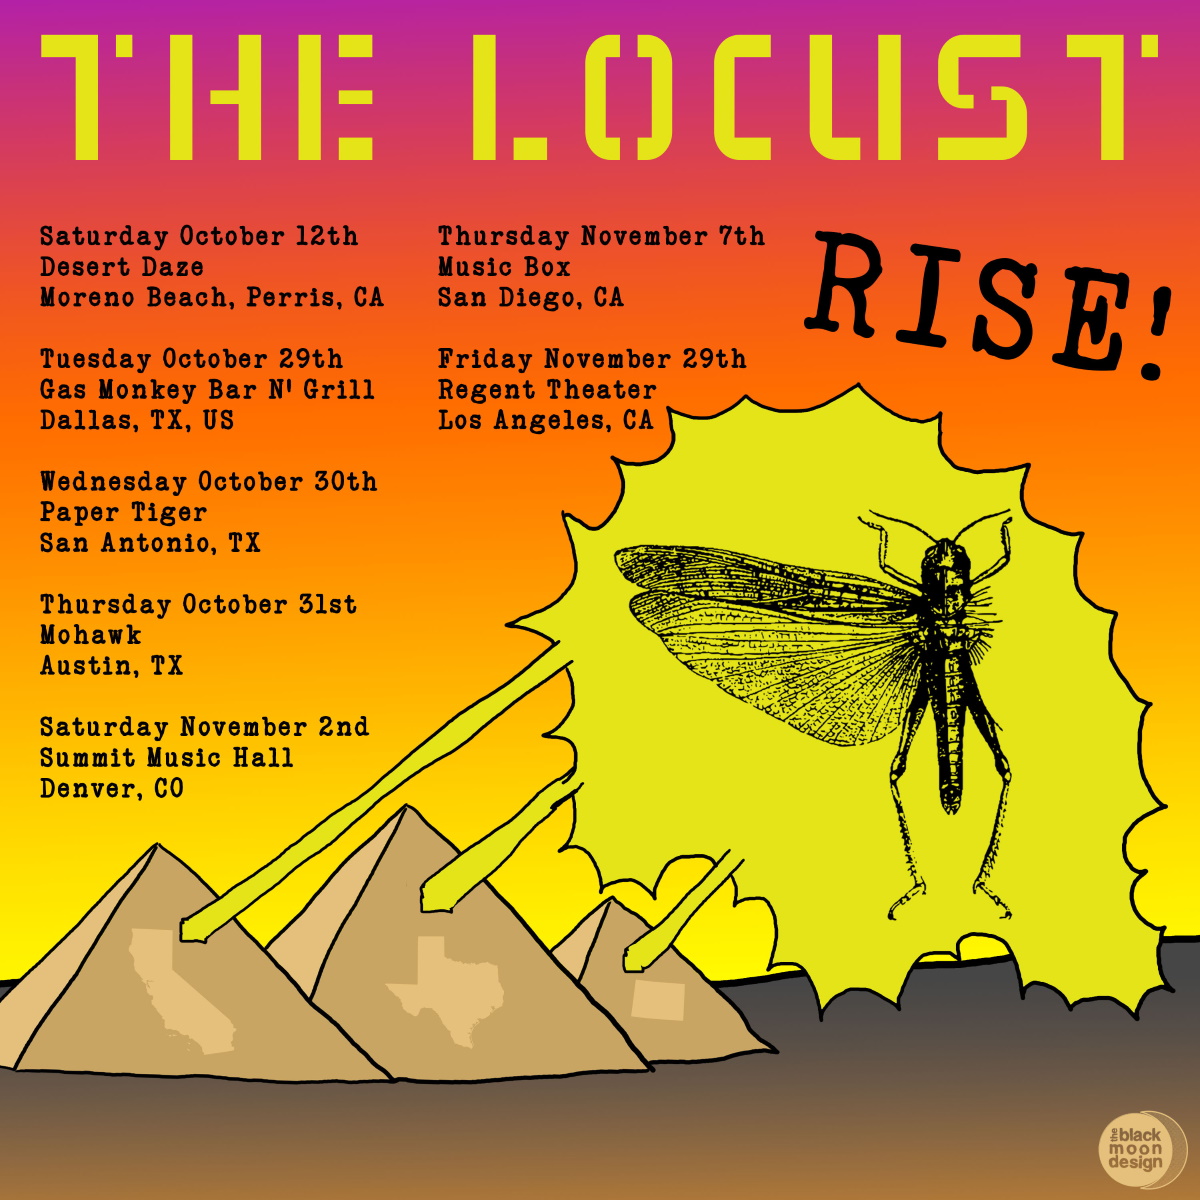 THE LOCUST live shows!